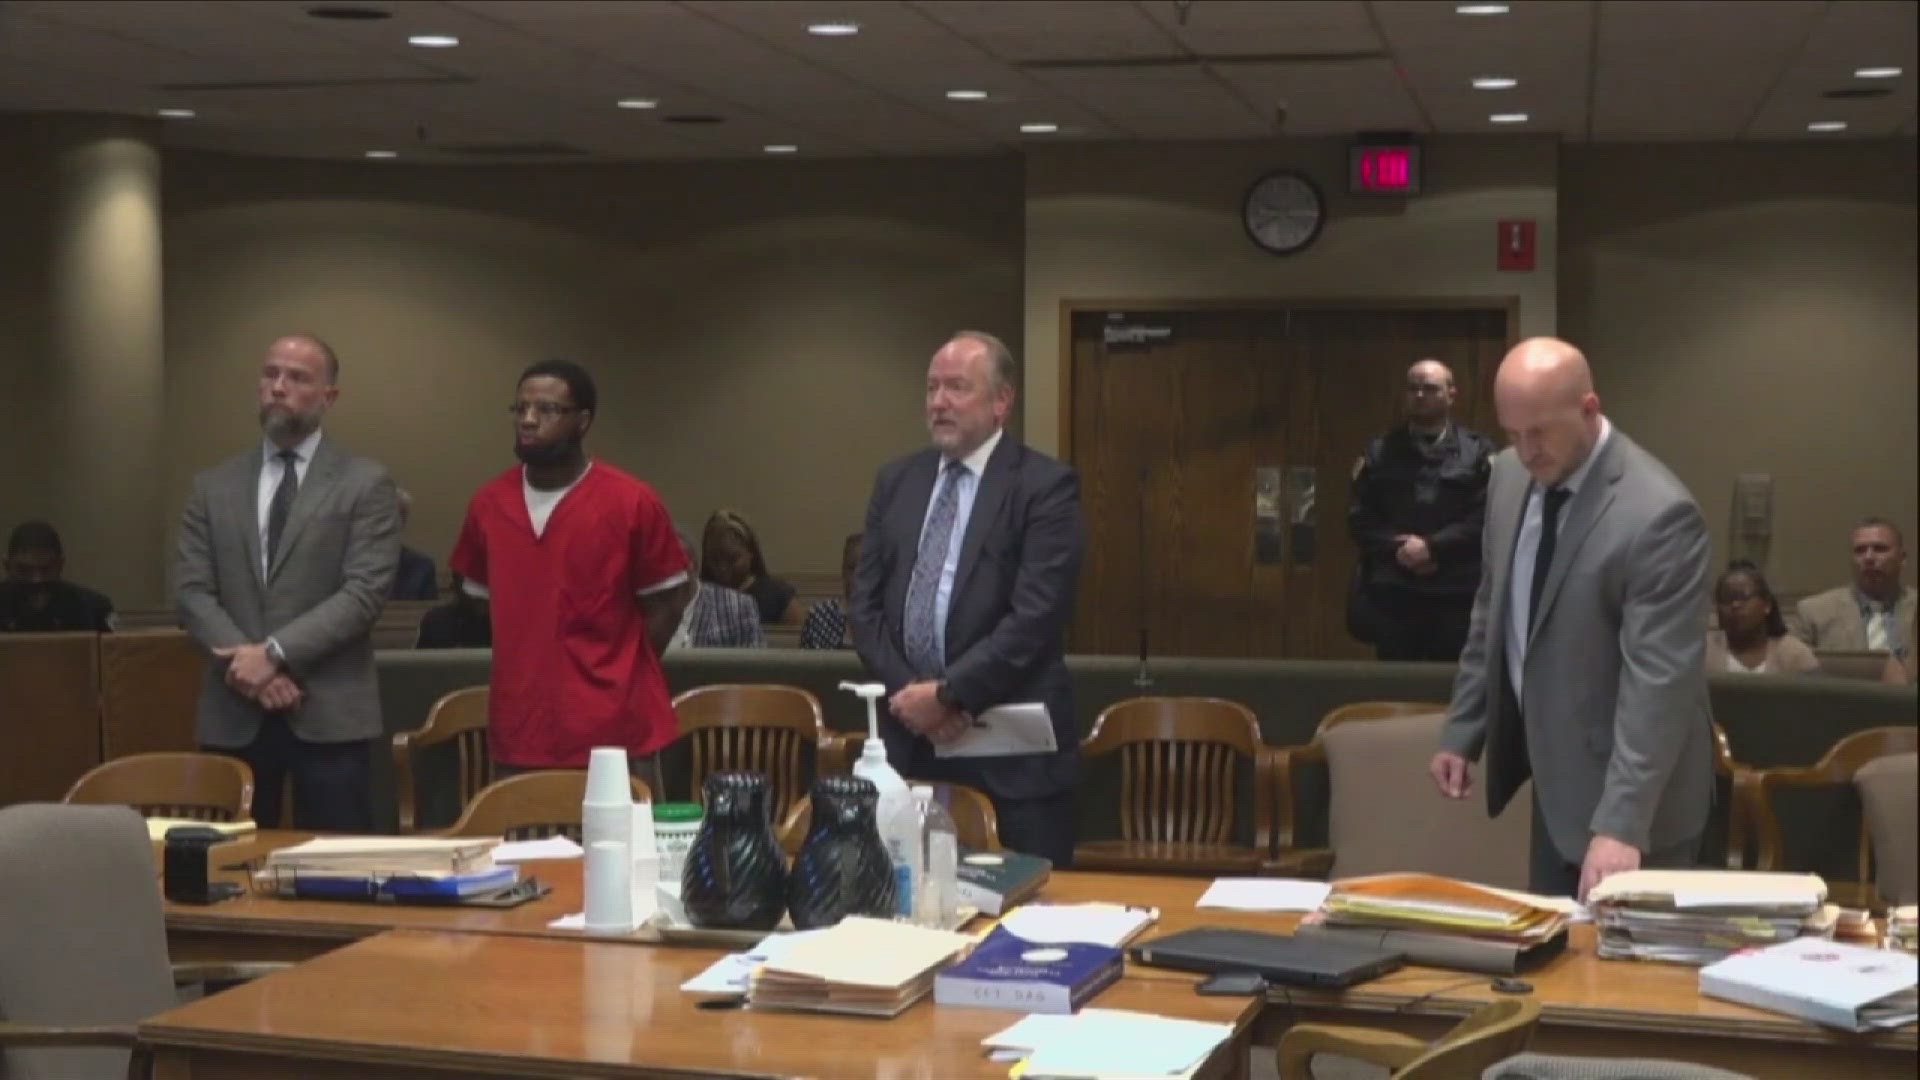 Justin Johnson and Cornelius Smith Jr. were originally set to head to trial in June for the murder of Young Dolph, whose real name was Adolph Thornton Jr.